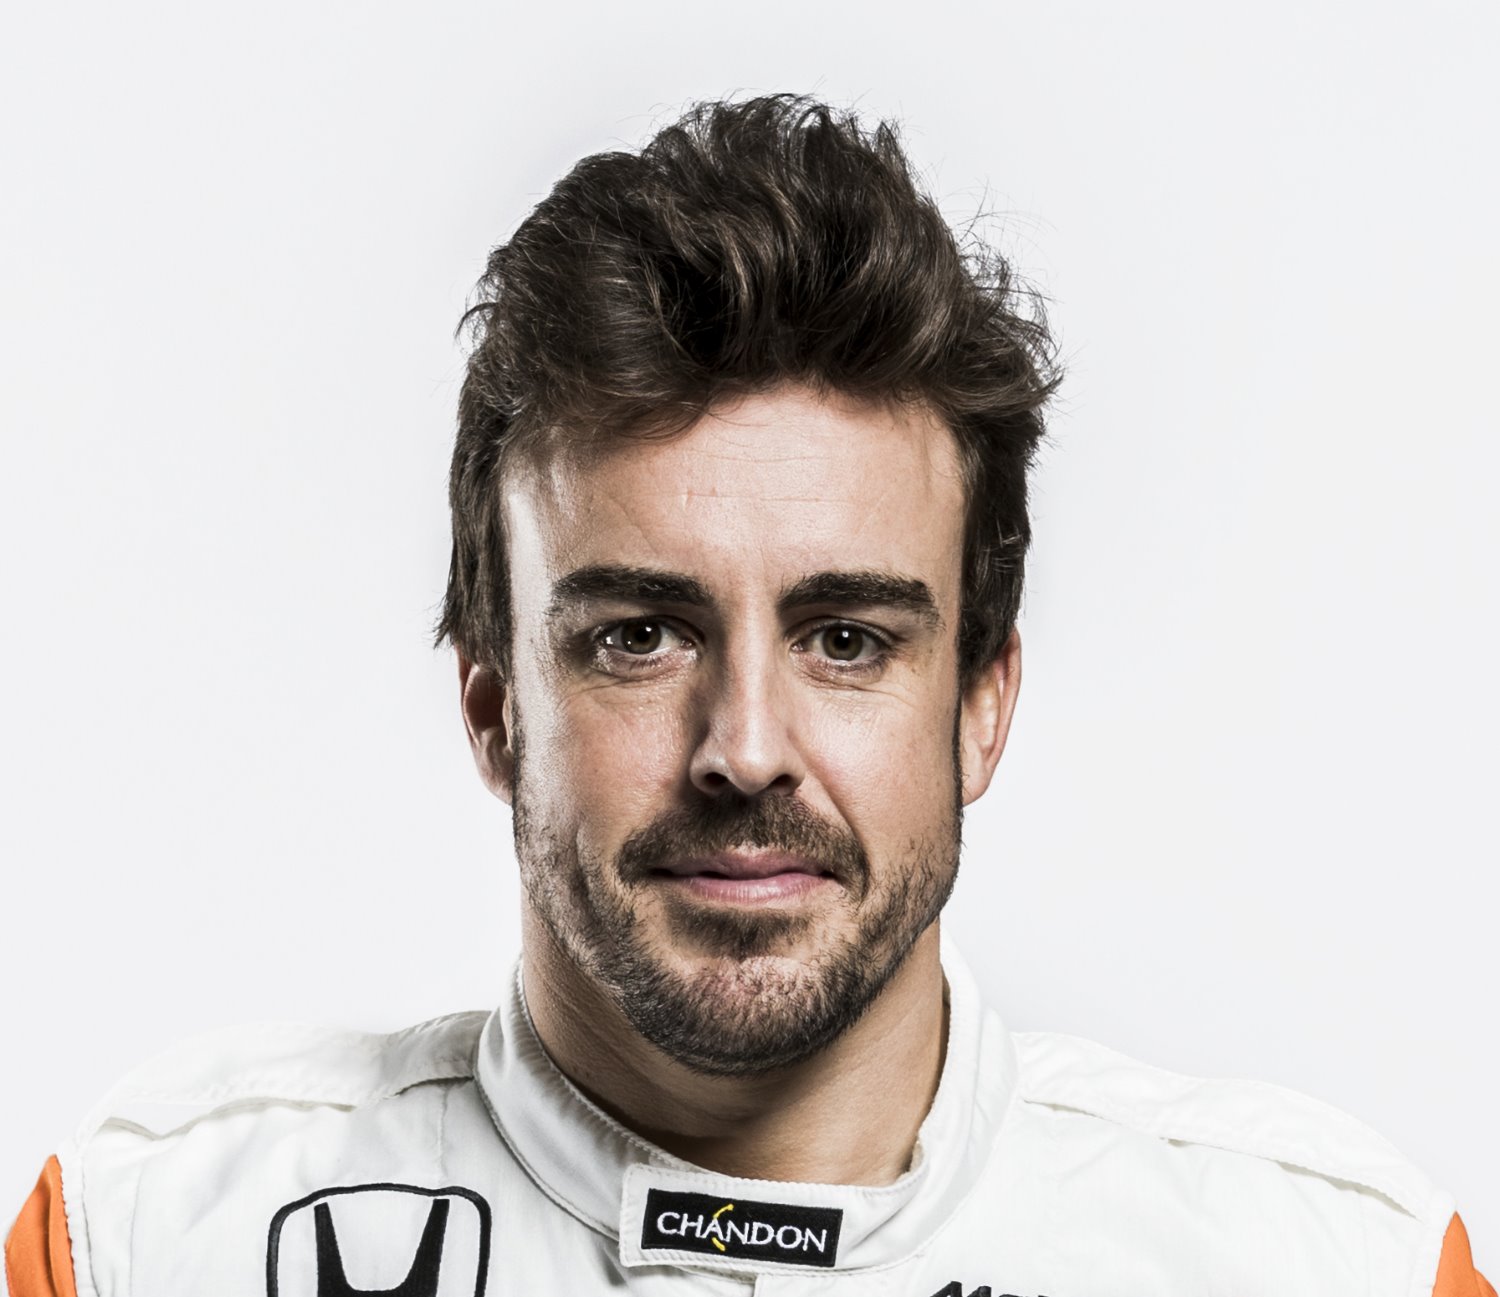 In IndyCar Alonso will be in a top car capable of winning